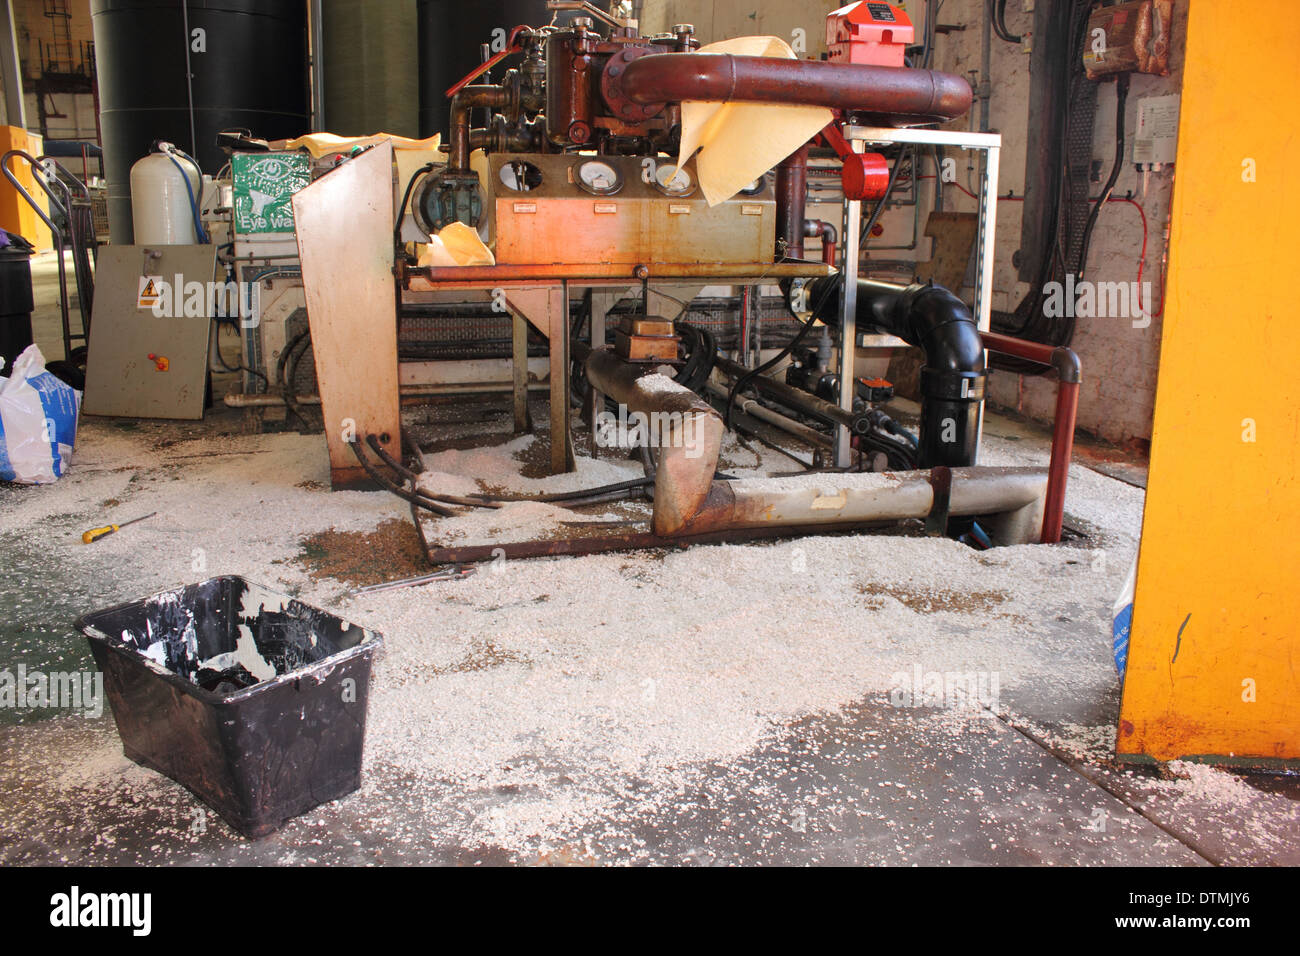 A Diesel fuel spill in a boilerhouse with absorbent pads and granules soaking up and containing the spillage Stock Photo